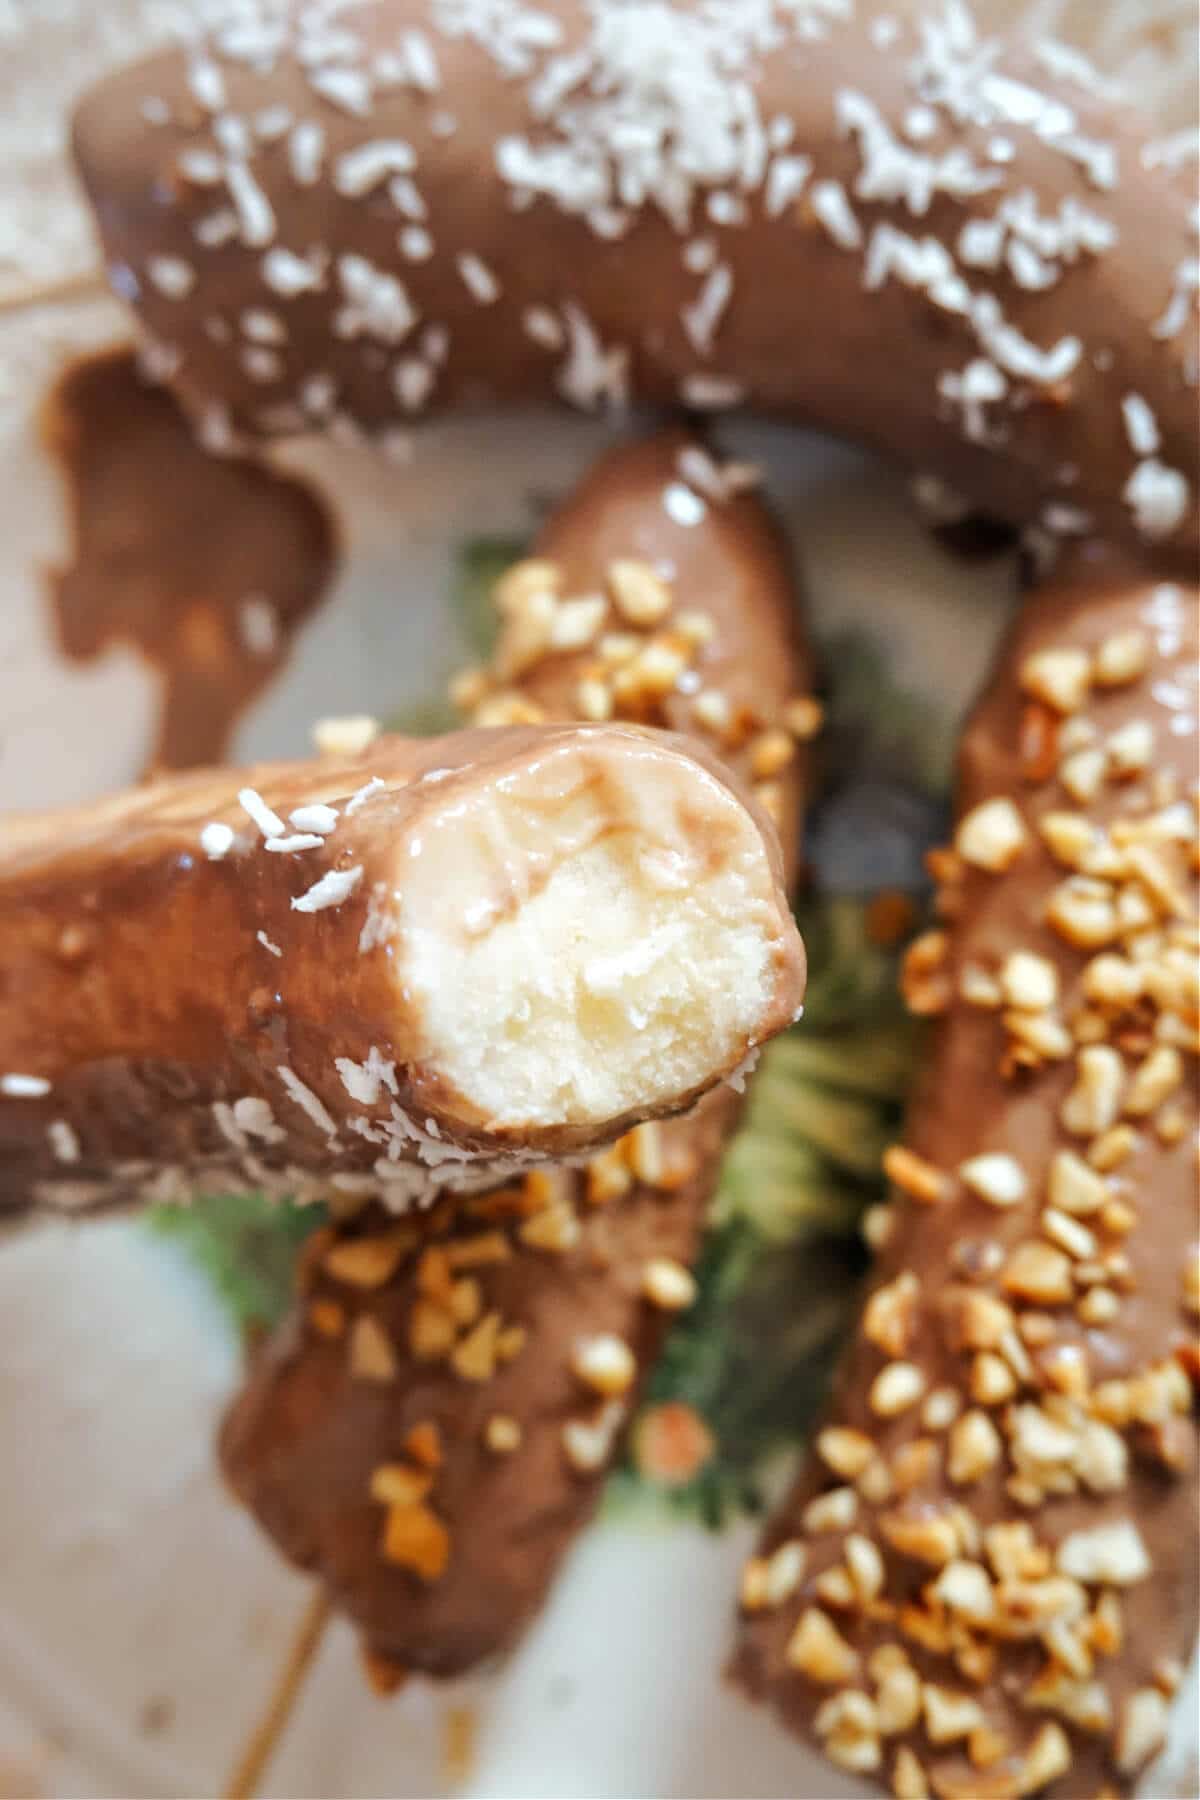 A chocolate-covered banana bitten into it with more chocolate bananas in the background.